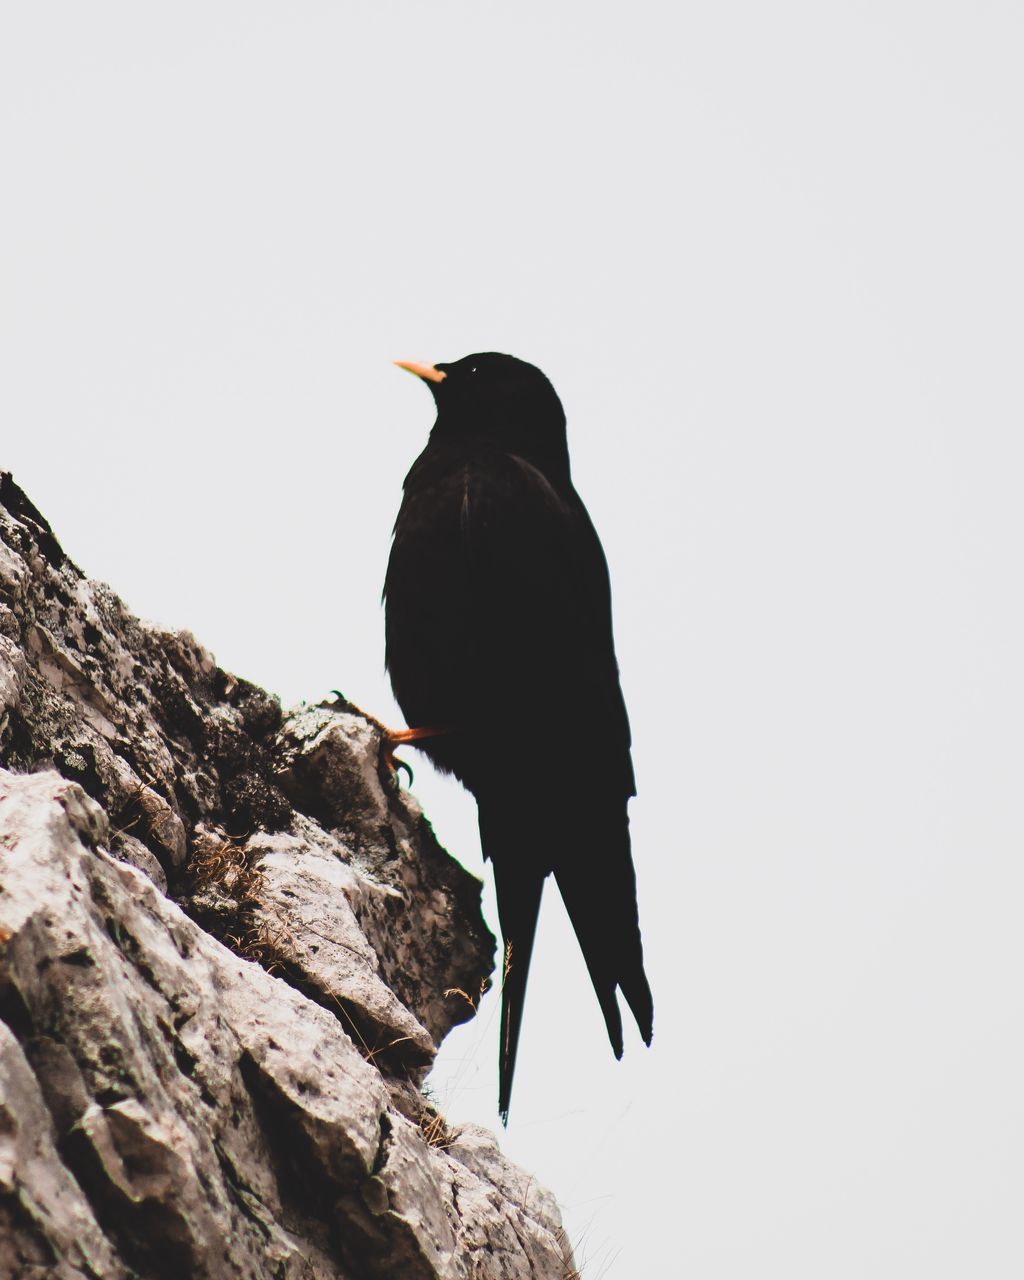 LOW ANGLE VIEW OF A BIRD PERCHING ON ROCK